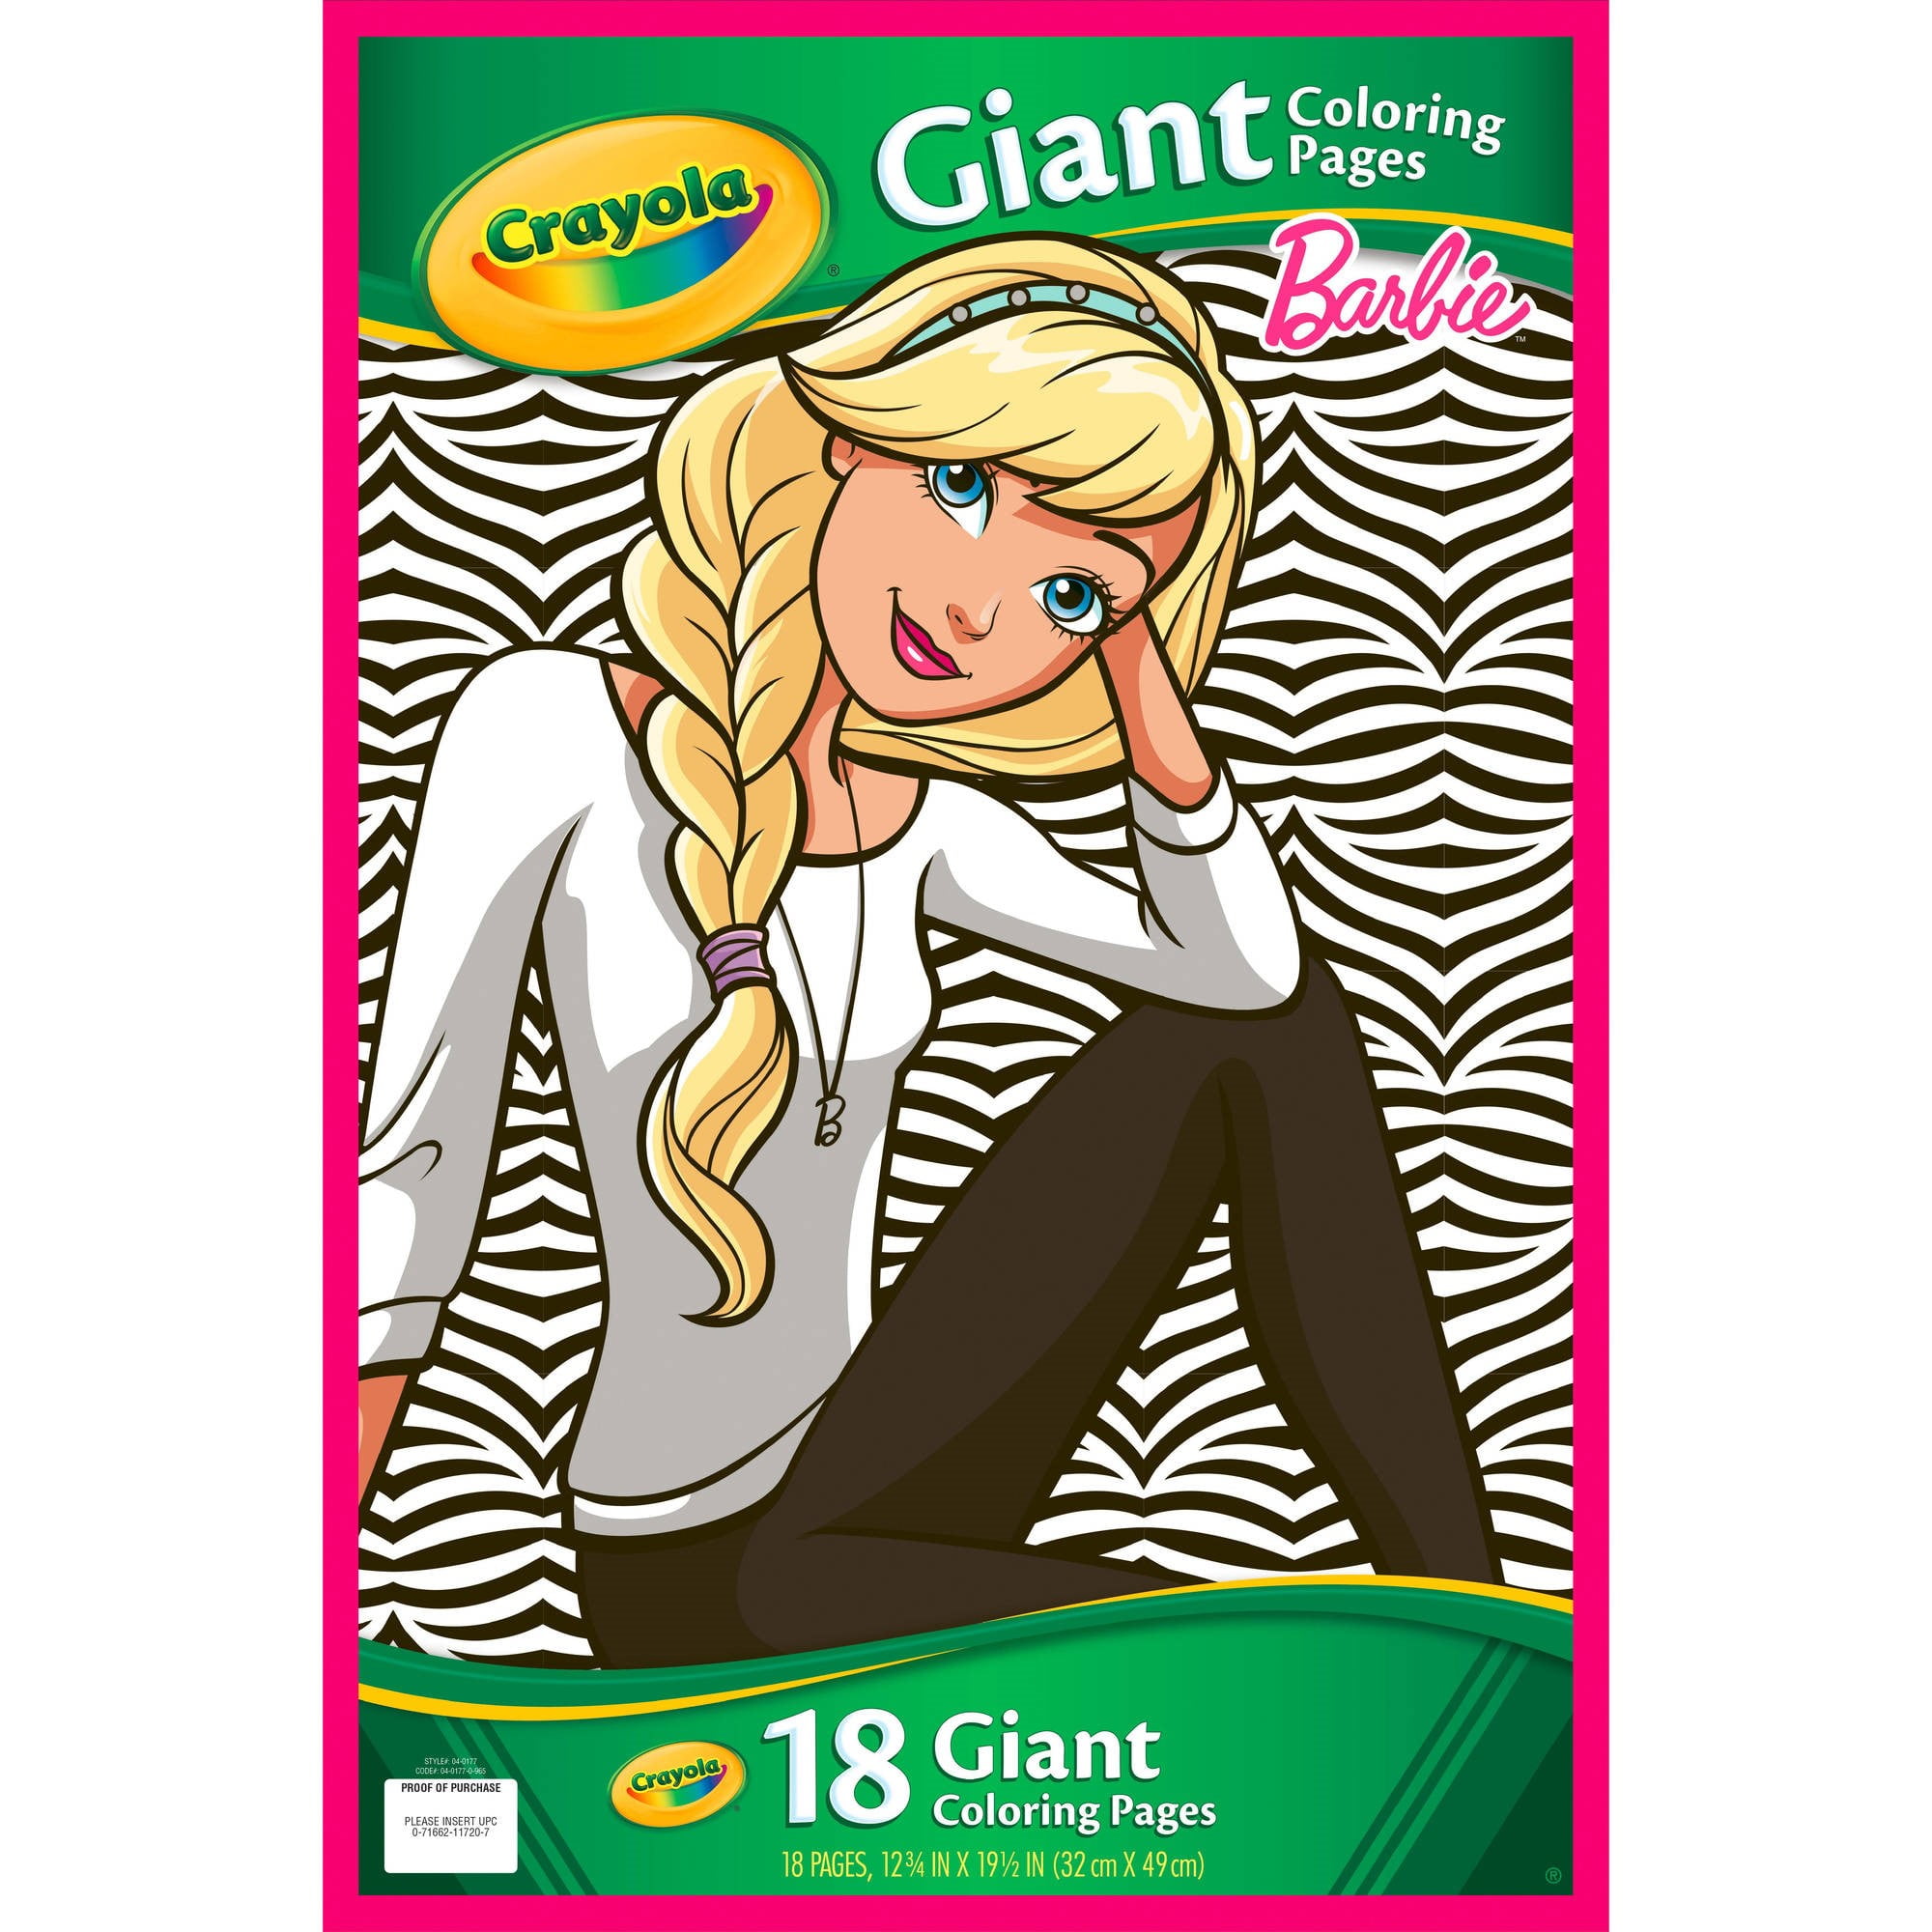 Crayola Giant Coloring Pages, Barbie, 20 Count